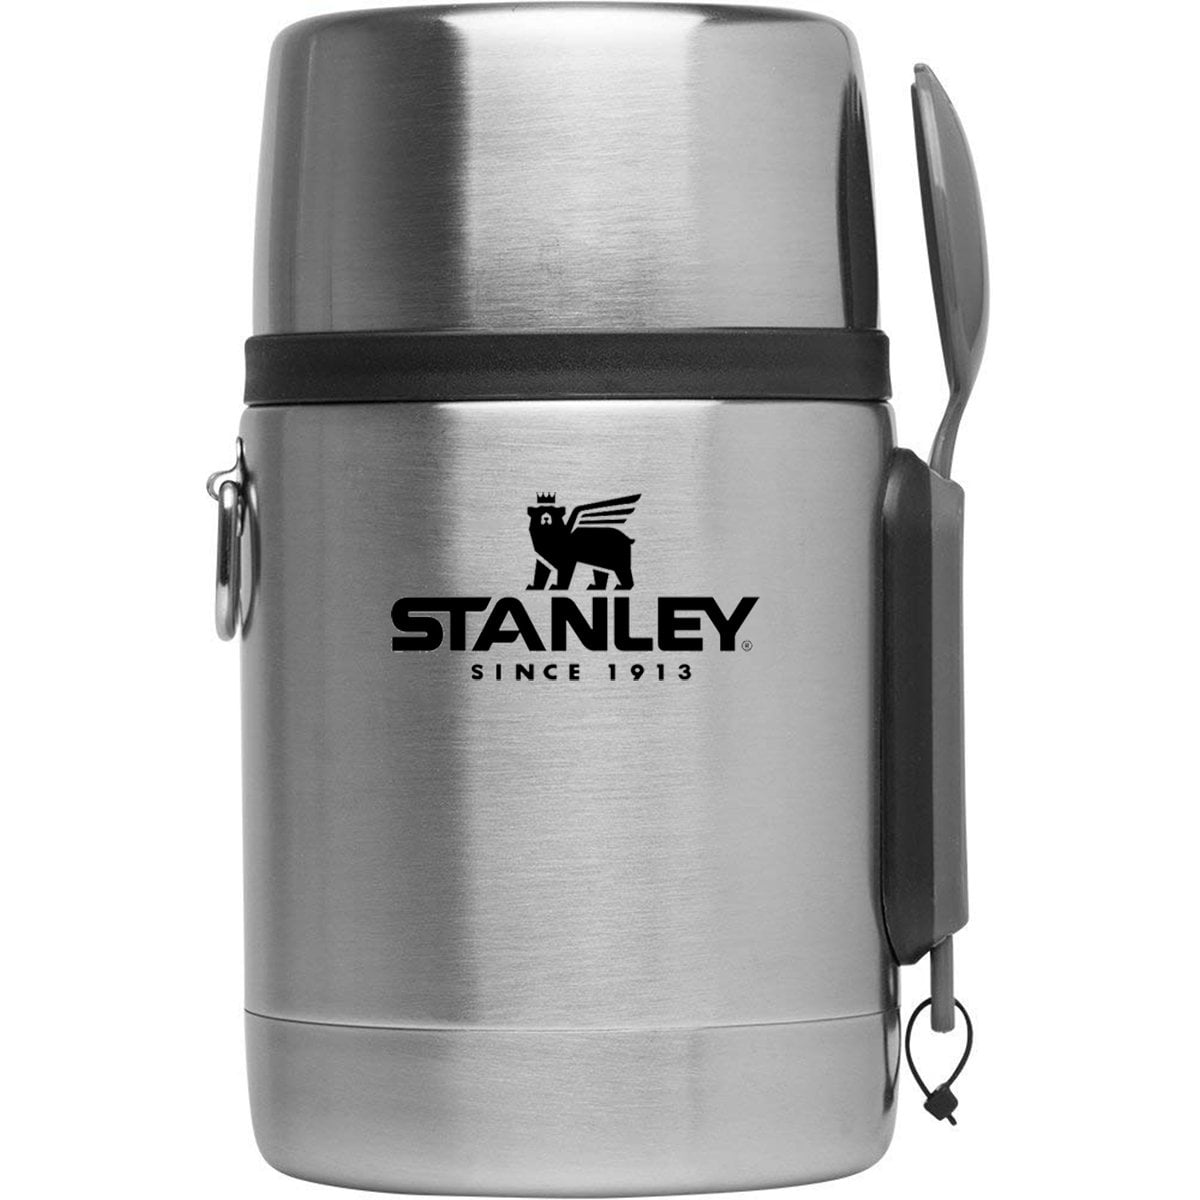 Details about   NEW Thermos Mine Craft Hot And Cold Food Storage 10 Oz Stainless Steel 